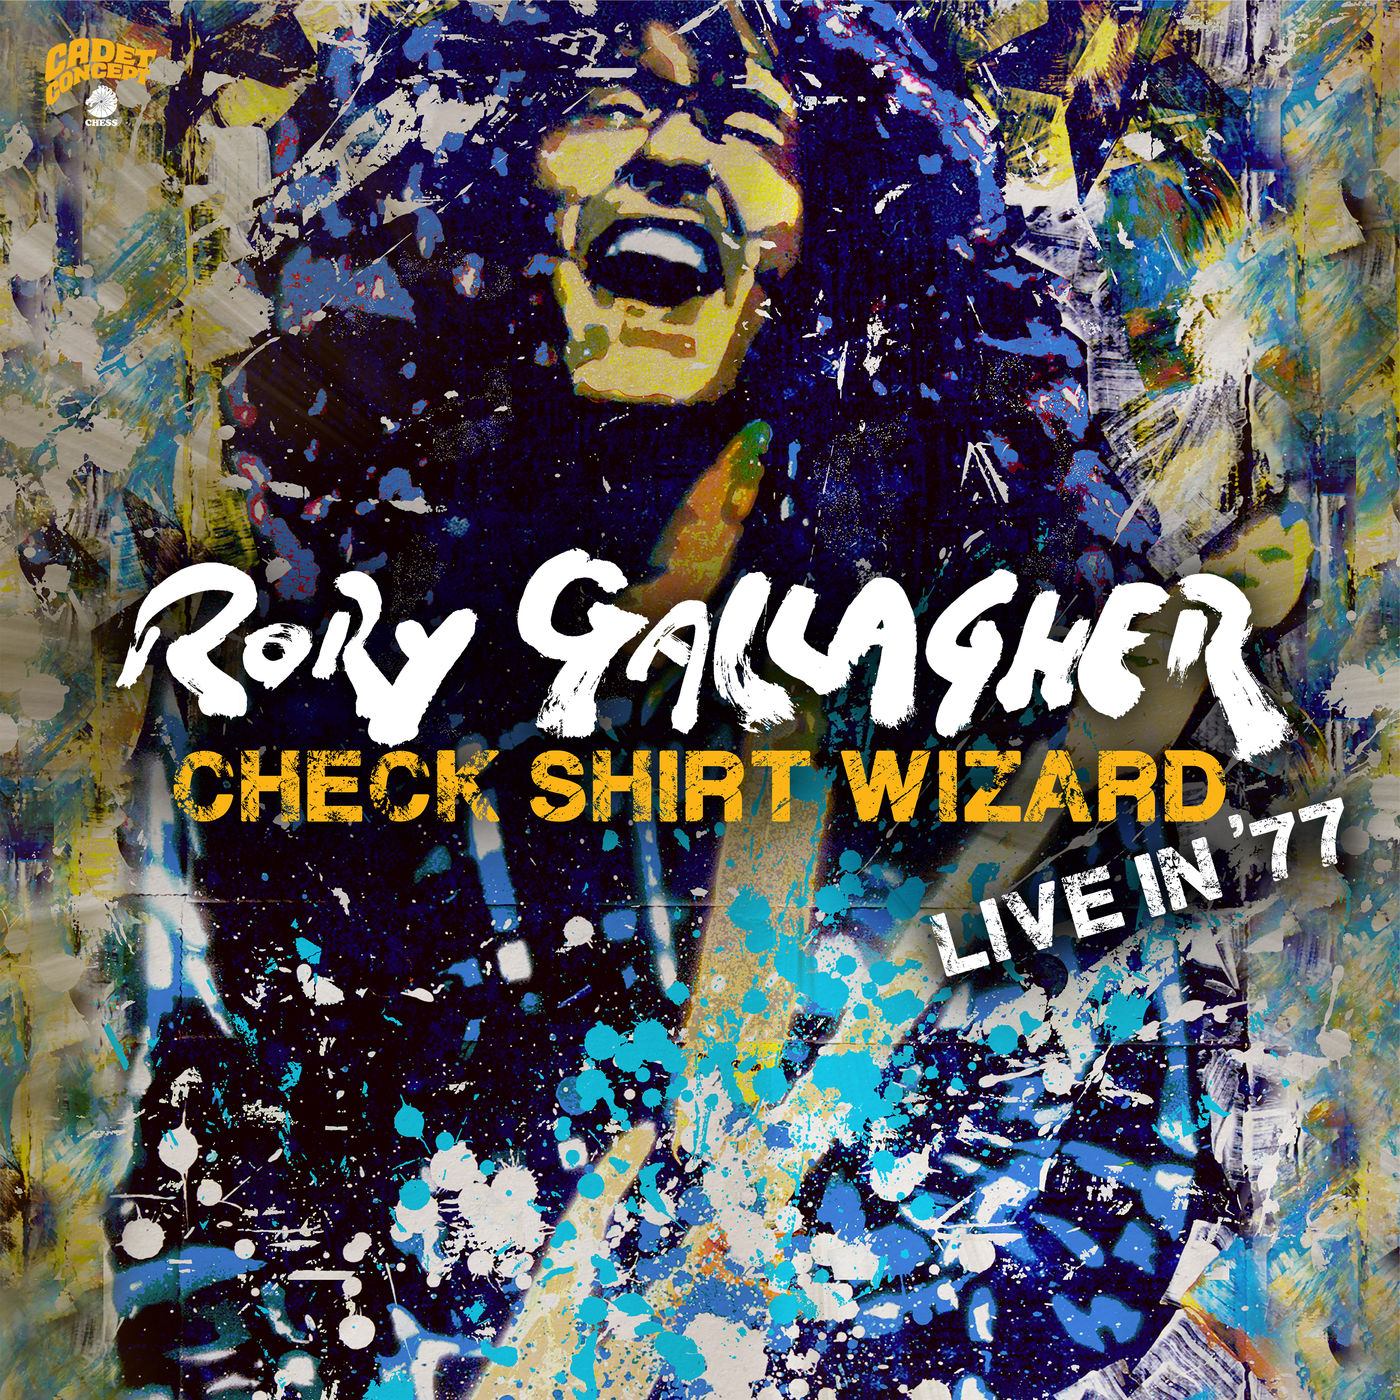 Rory Gallagher – Check Shirt Wizard Live In ’77 (2020) [FLAC 24bit/96kHz]